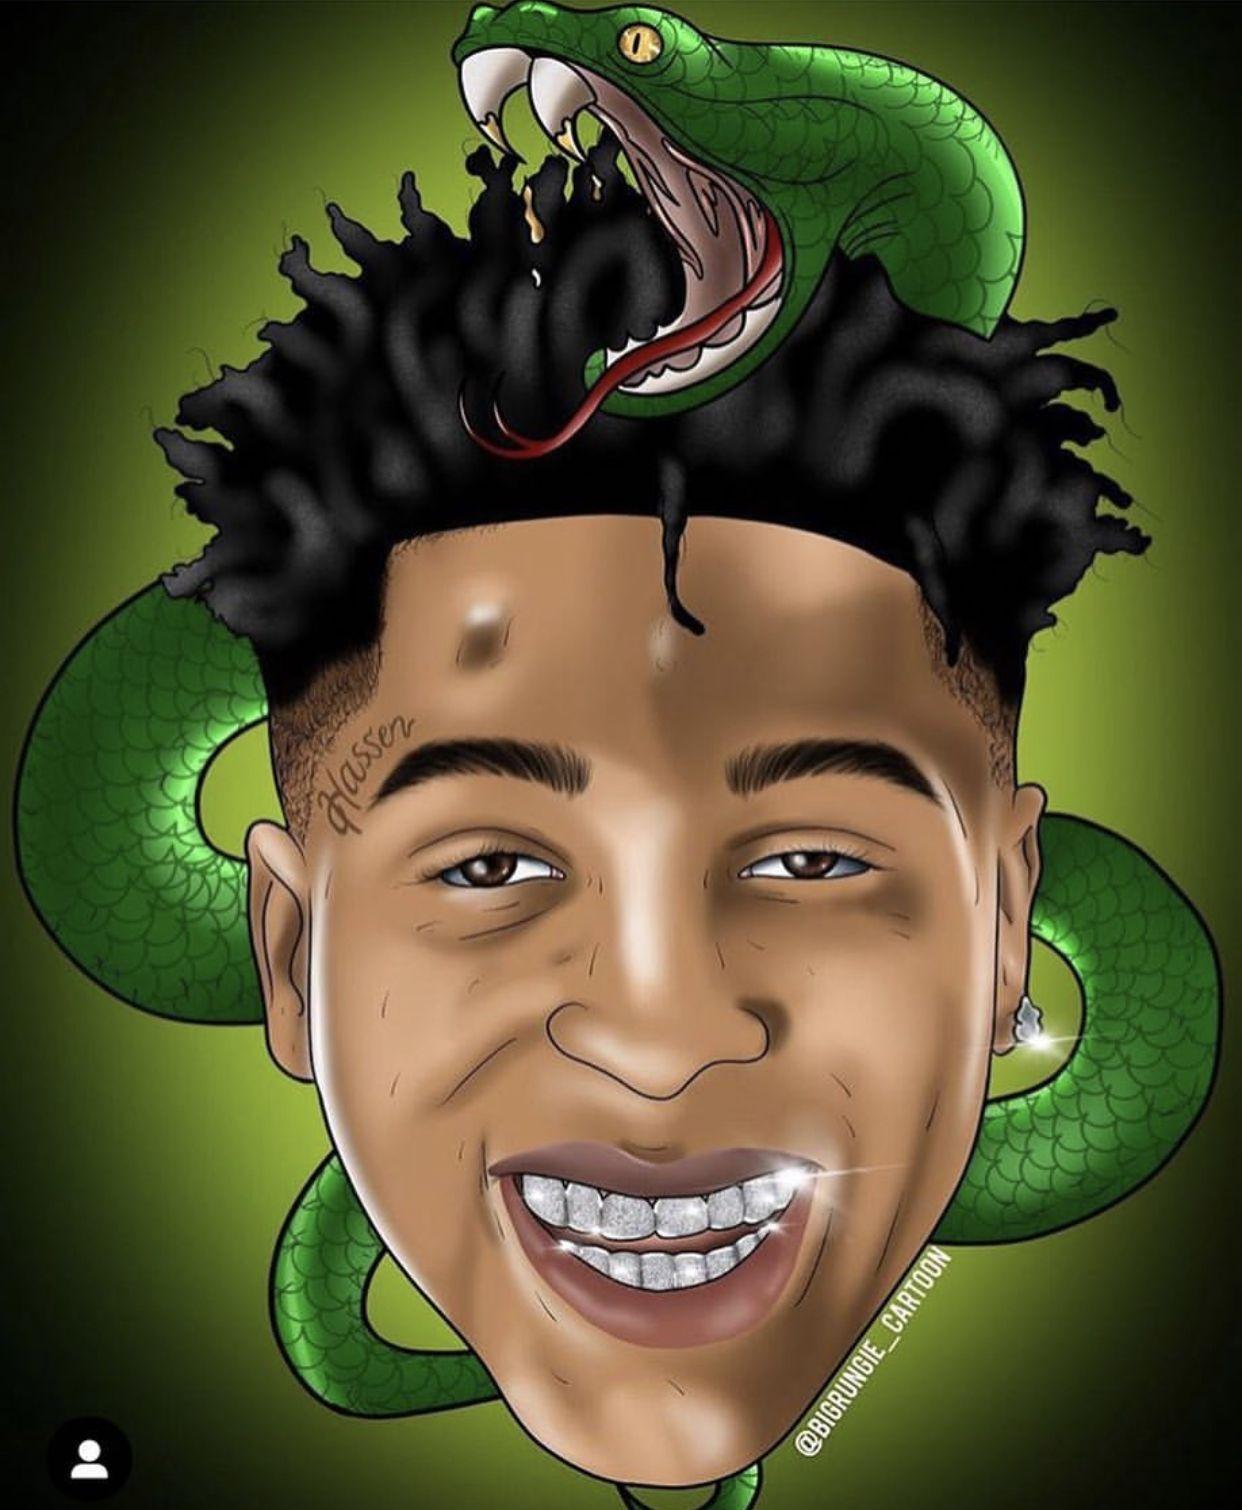 Nba Youngboy Cartoon Simpson - Pin by Lord Cristiano on Trill $hit